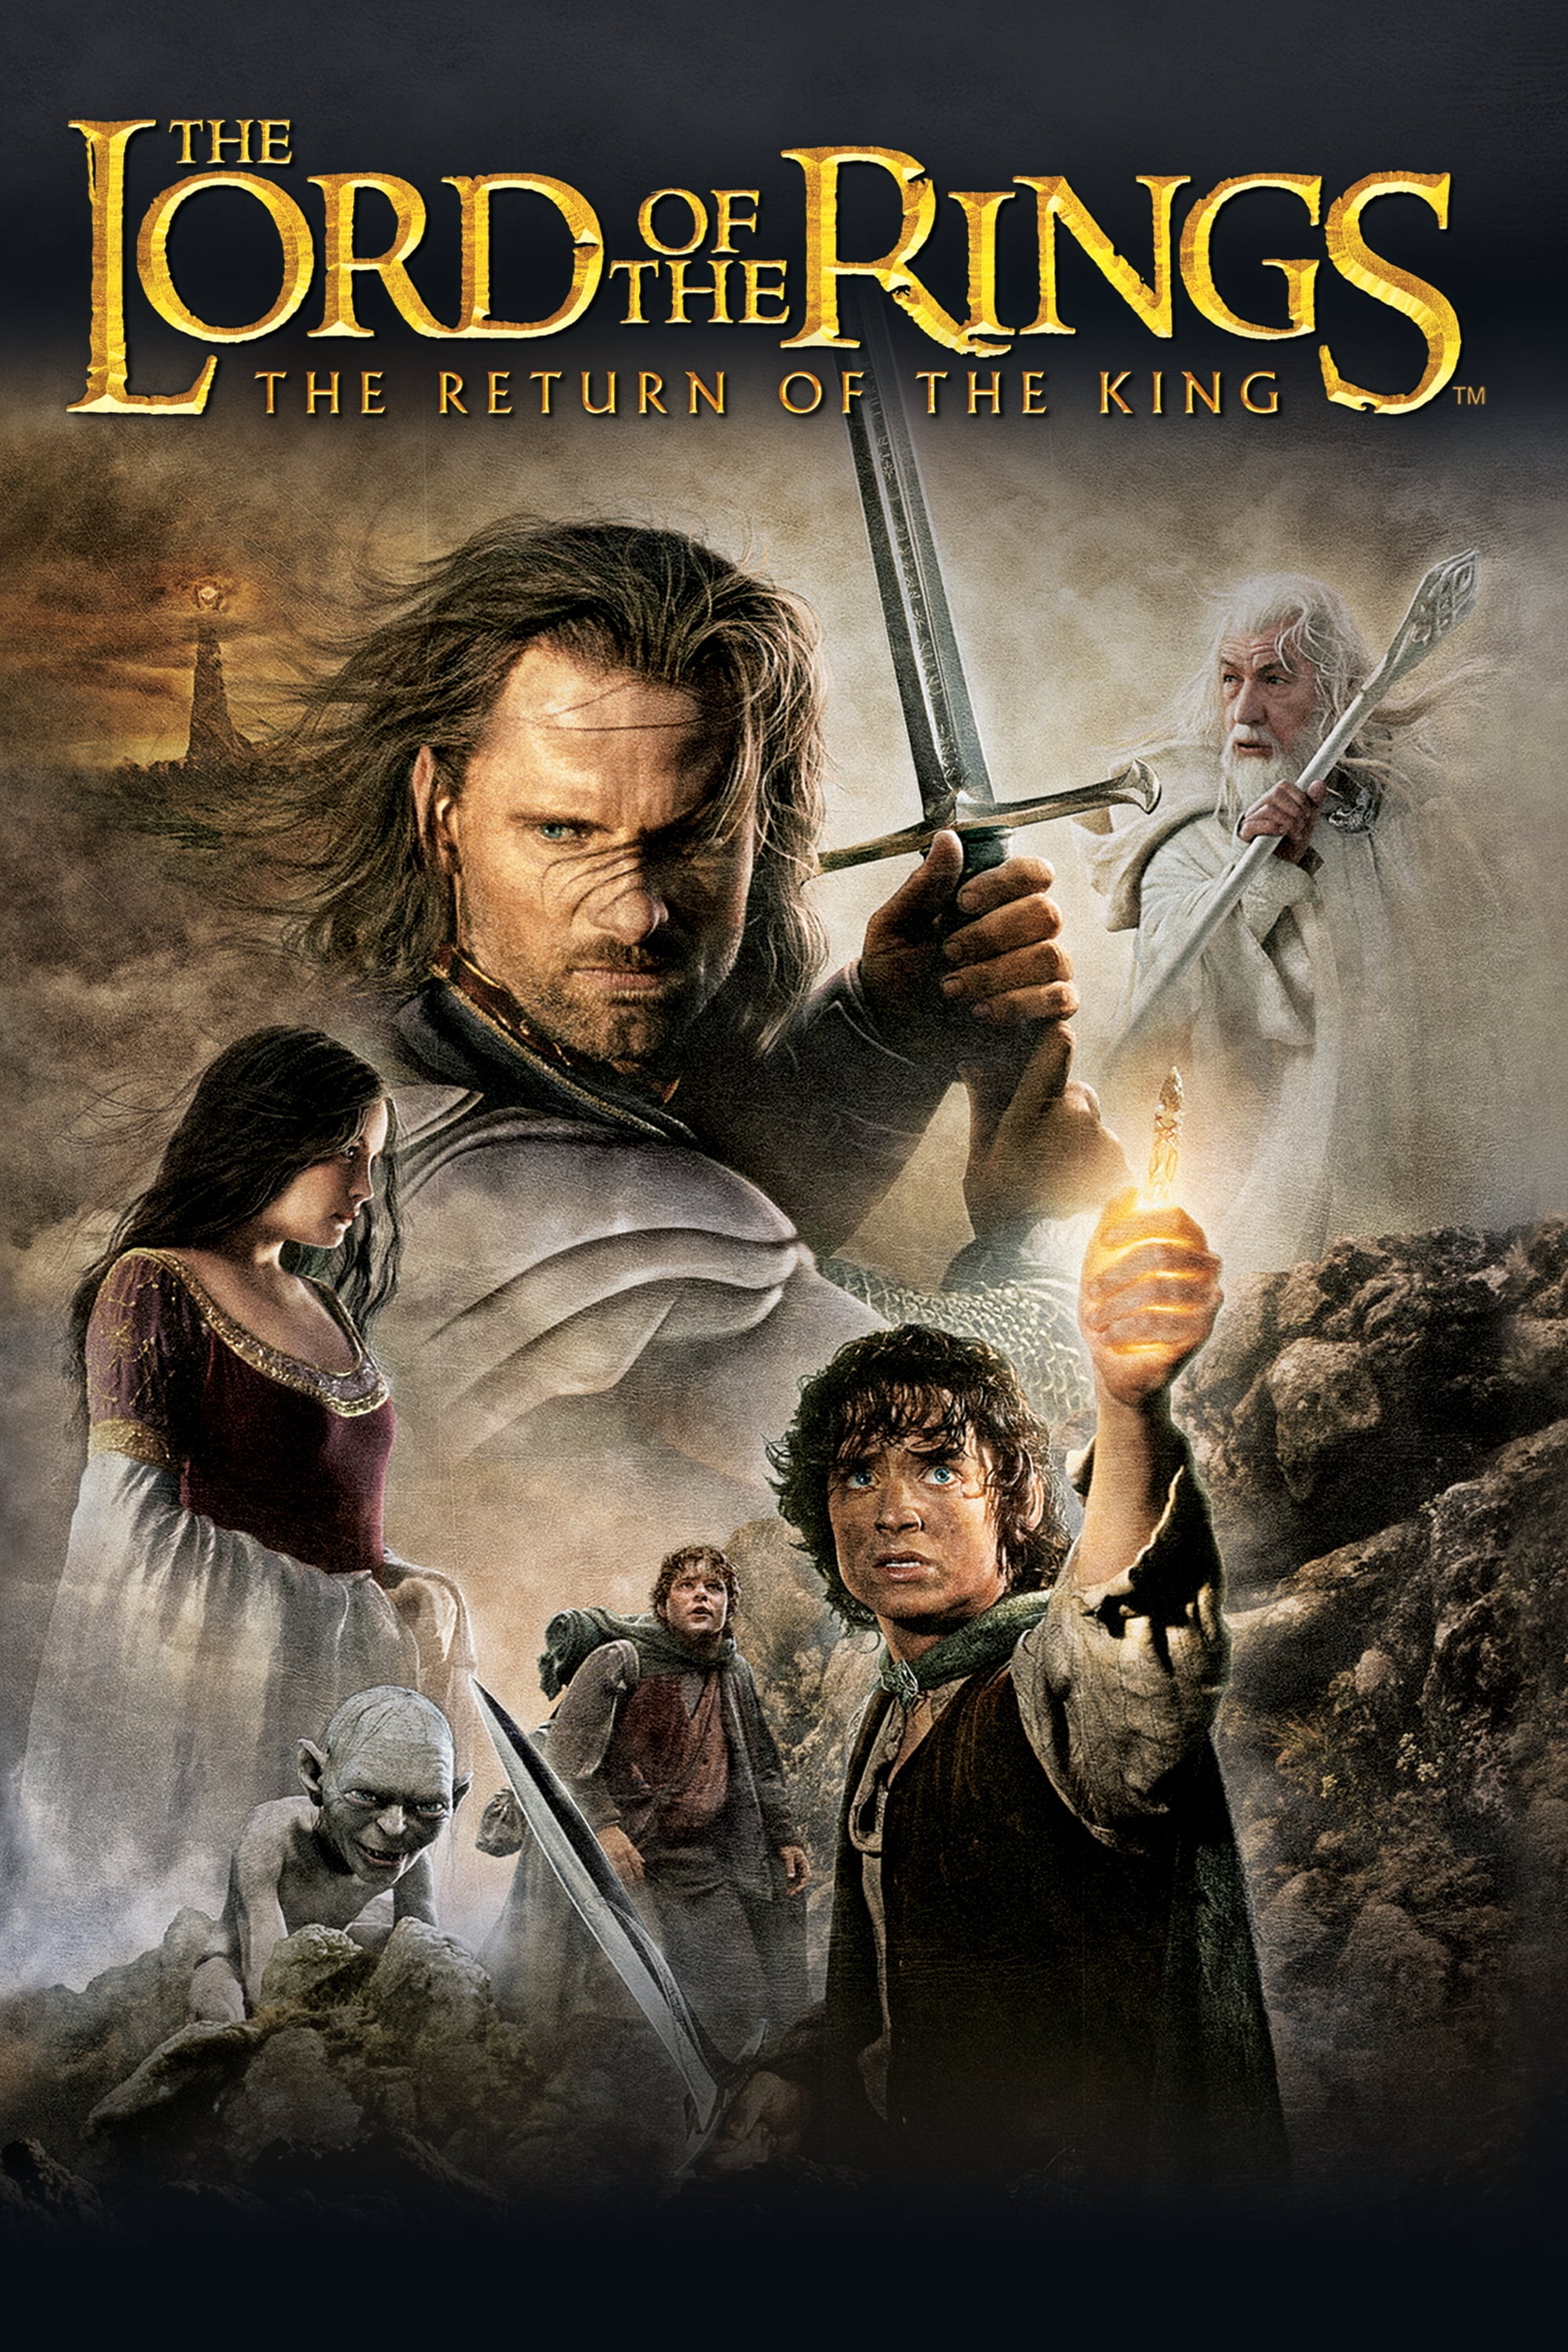 The lord of the rings. The return of the king